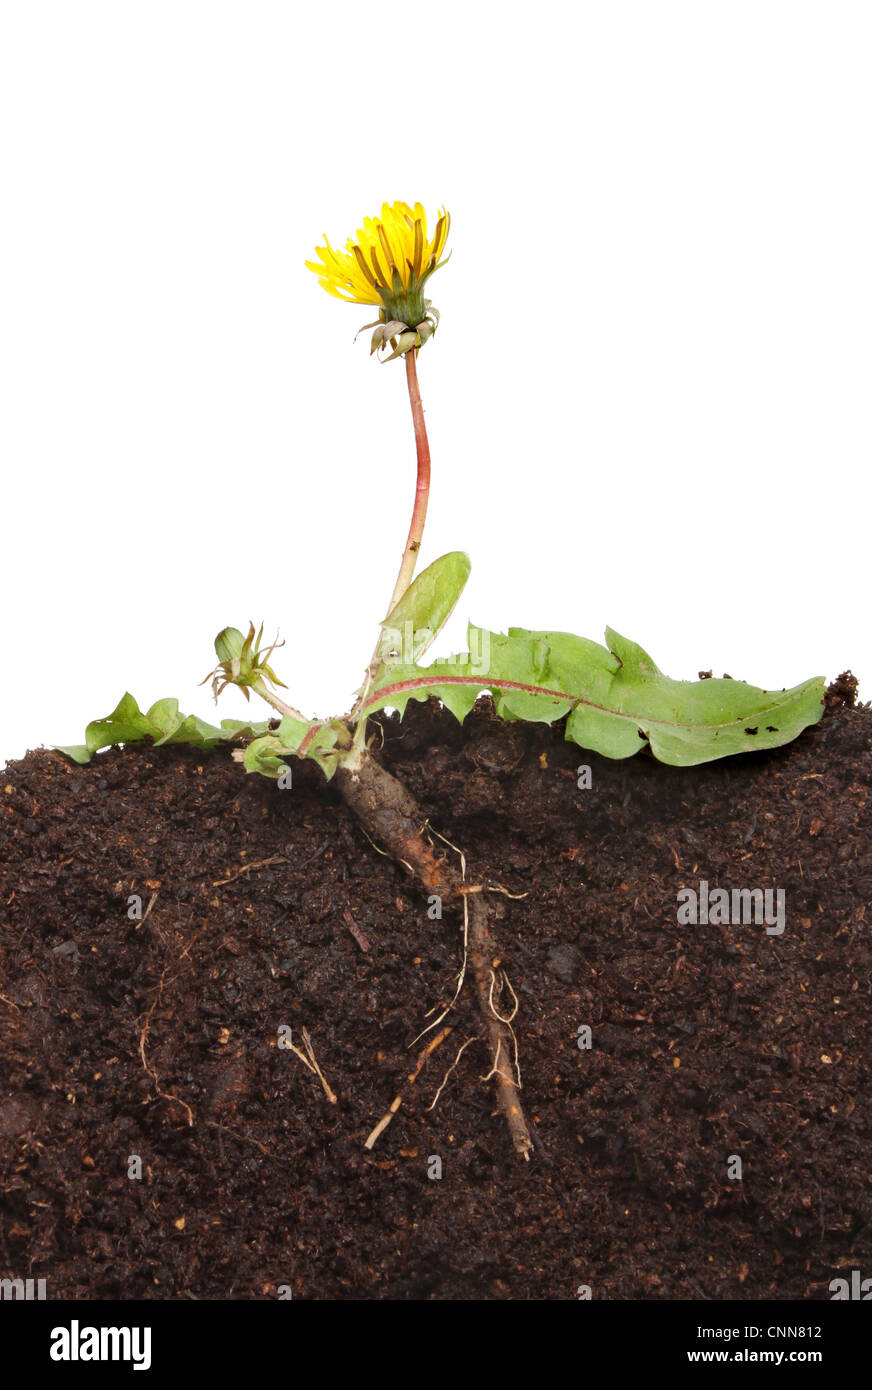 Dandelion, Taraxacum officinale, plant a section showing root structure leaves,flower and bud in soil against a white background Stock Photo